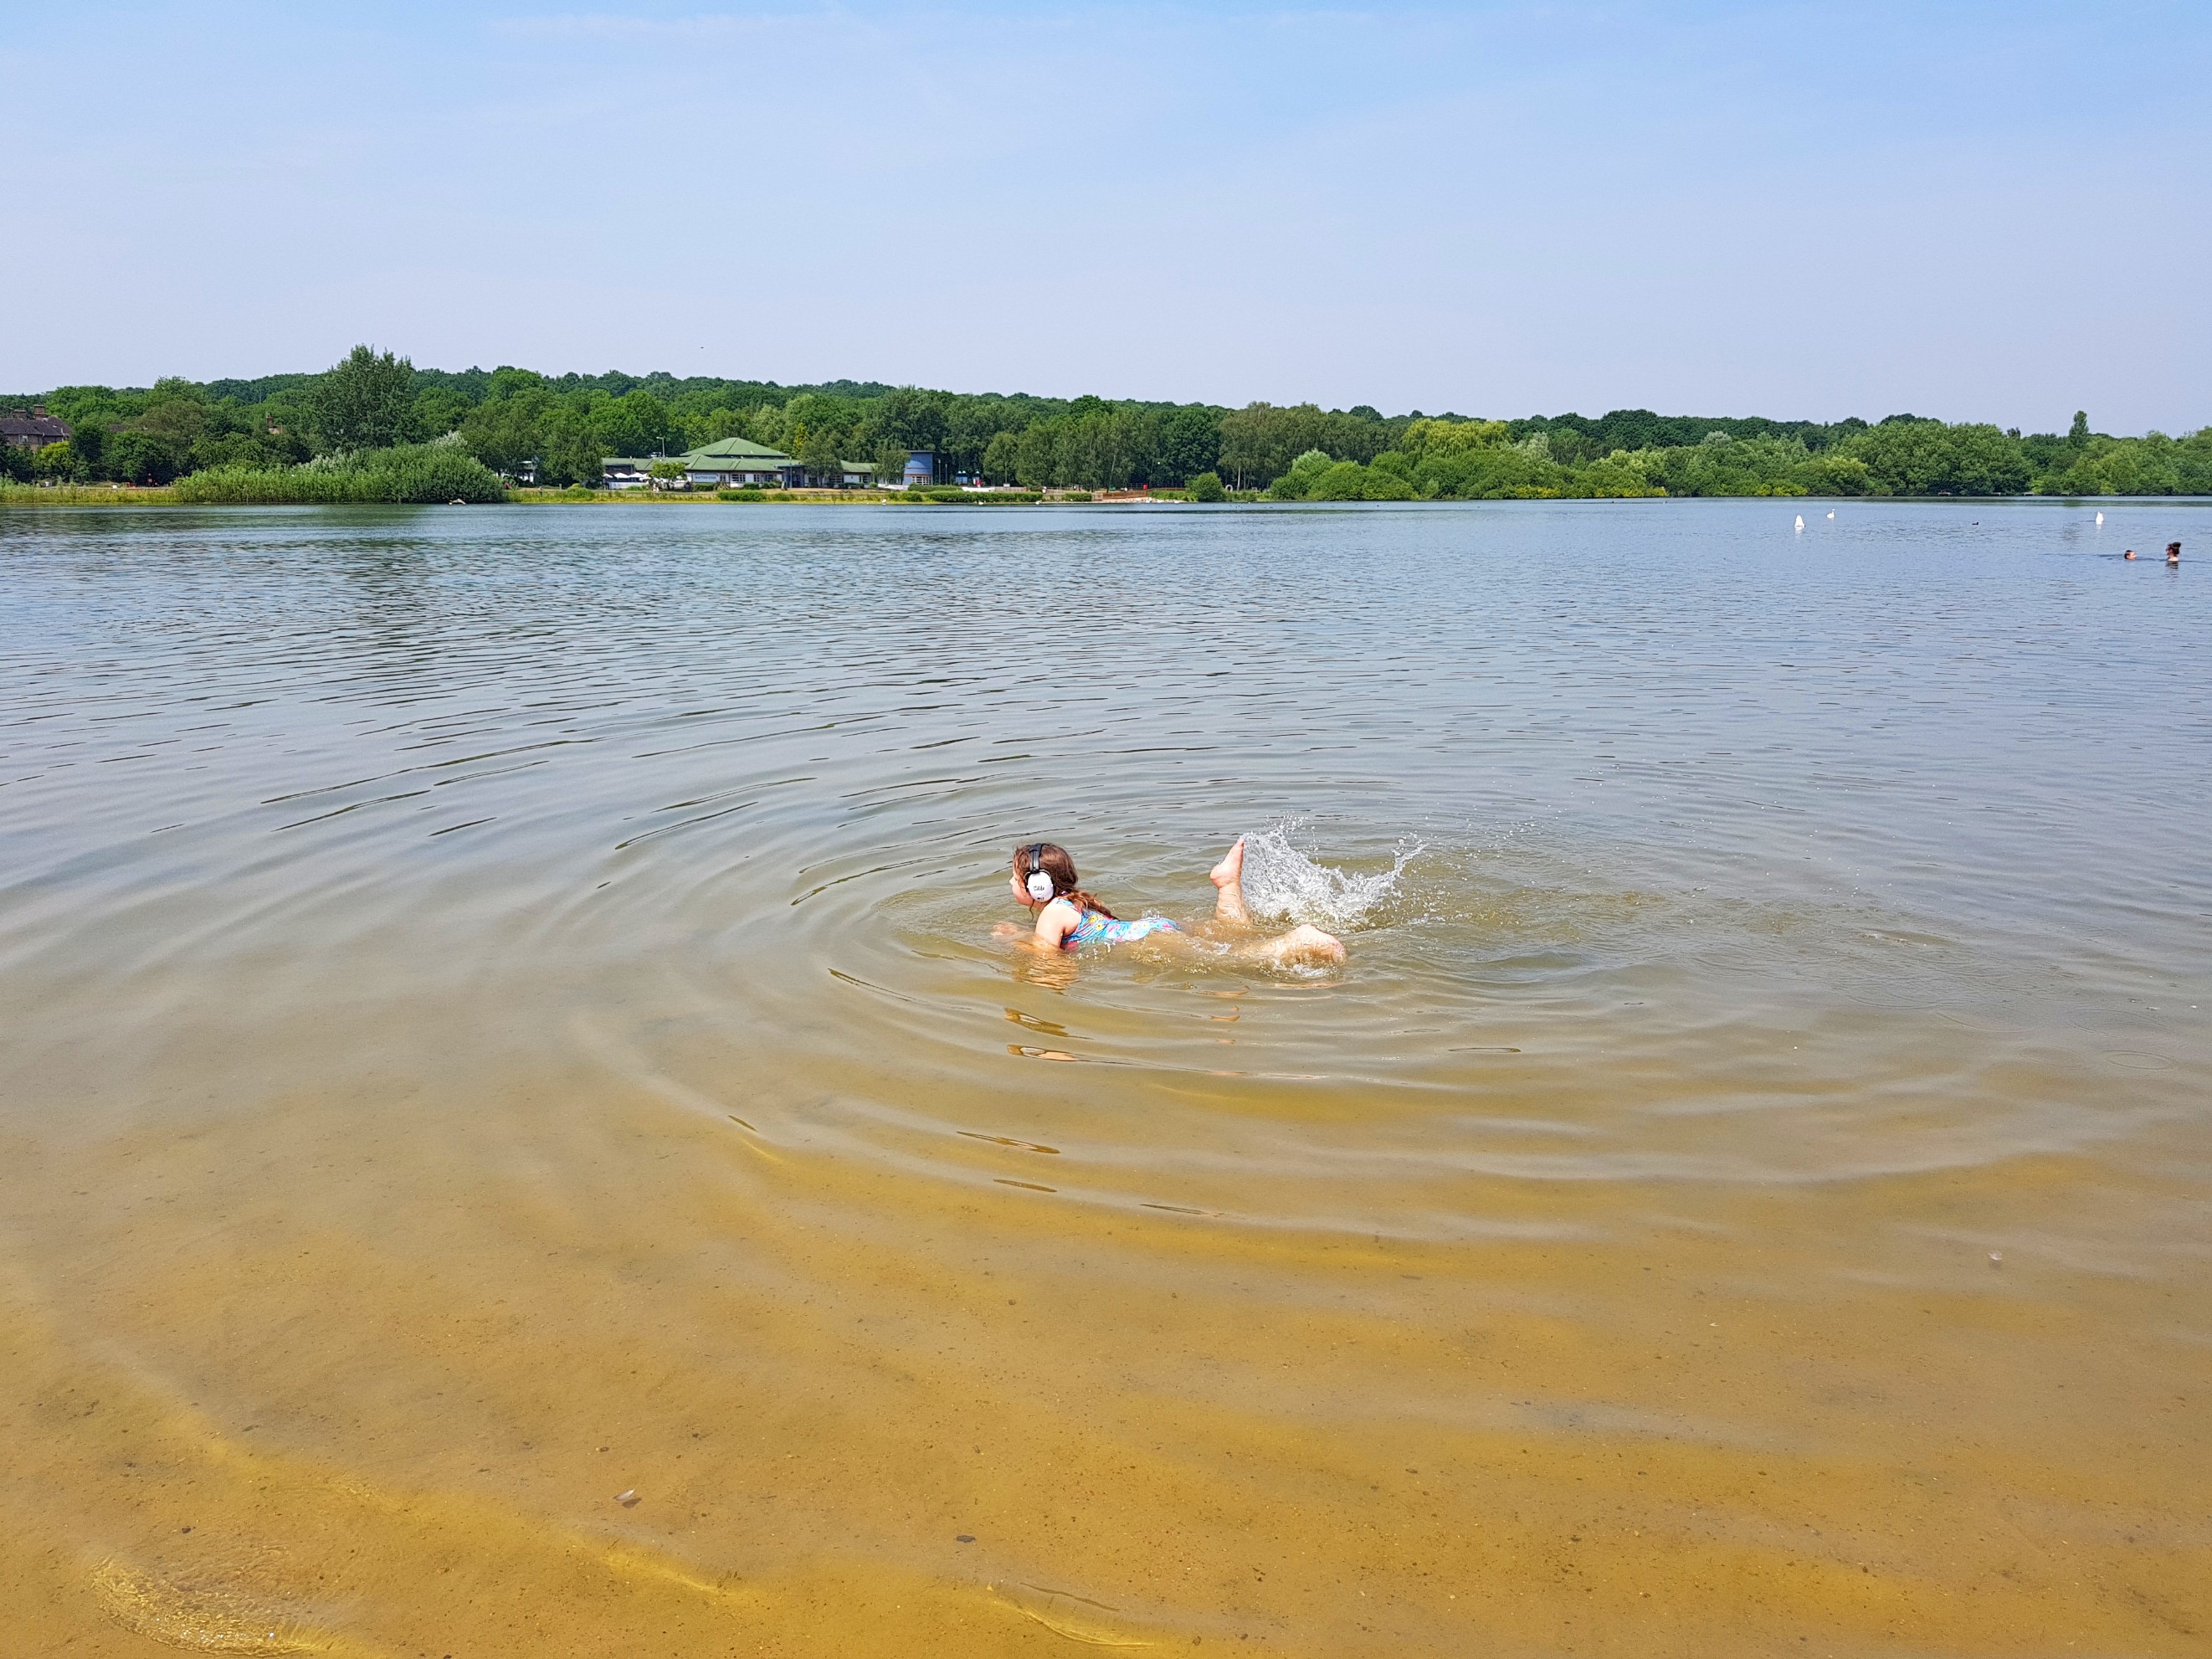 30 days wild, places to visit, Ruislip lido, days out, blue mind, #30dayswild, #livinglifewild, The Wildlife Trusts, 100 days of blue, #waterislife, #waterismedicine, stay wild, nature, wildlife, natural environment, childhood unplugged, get outside, outdoors